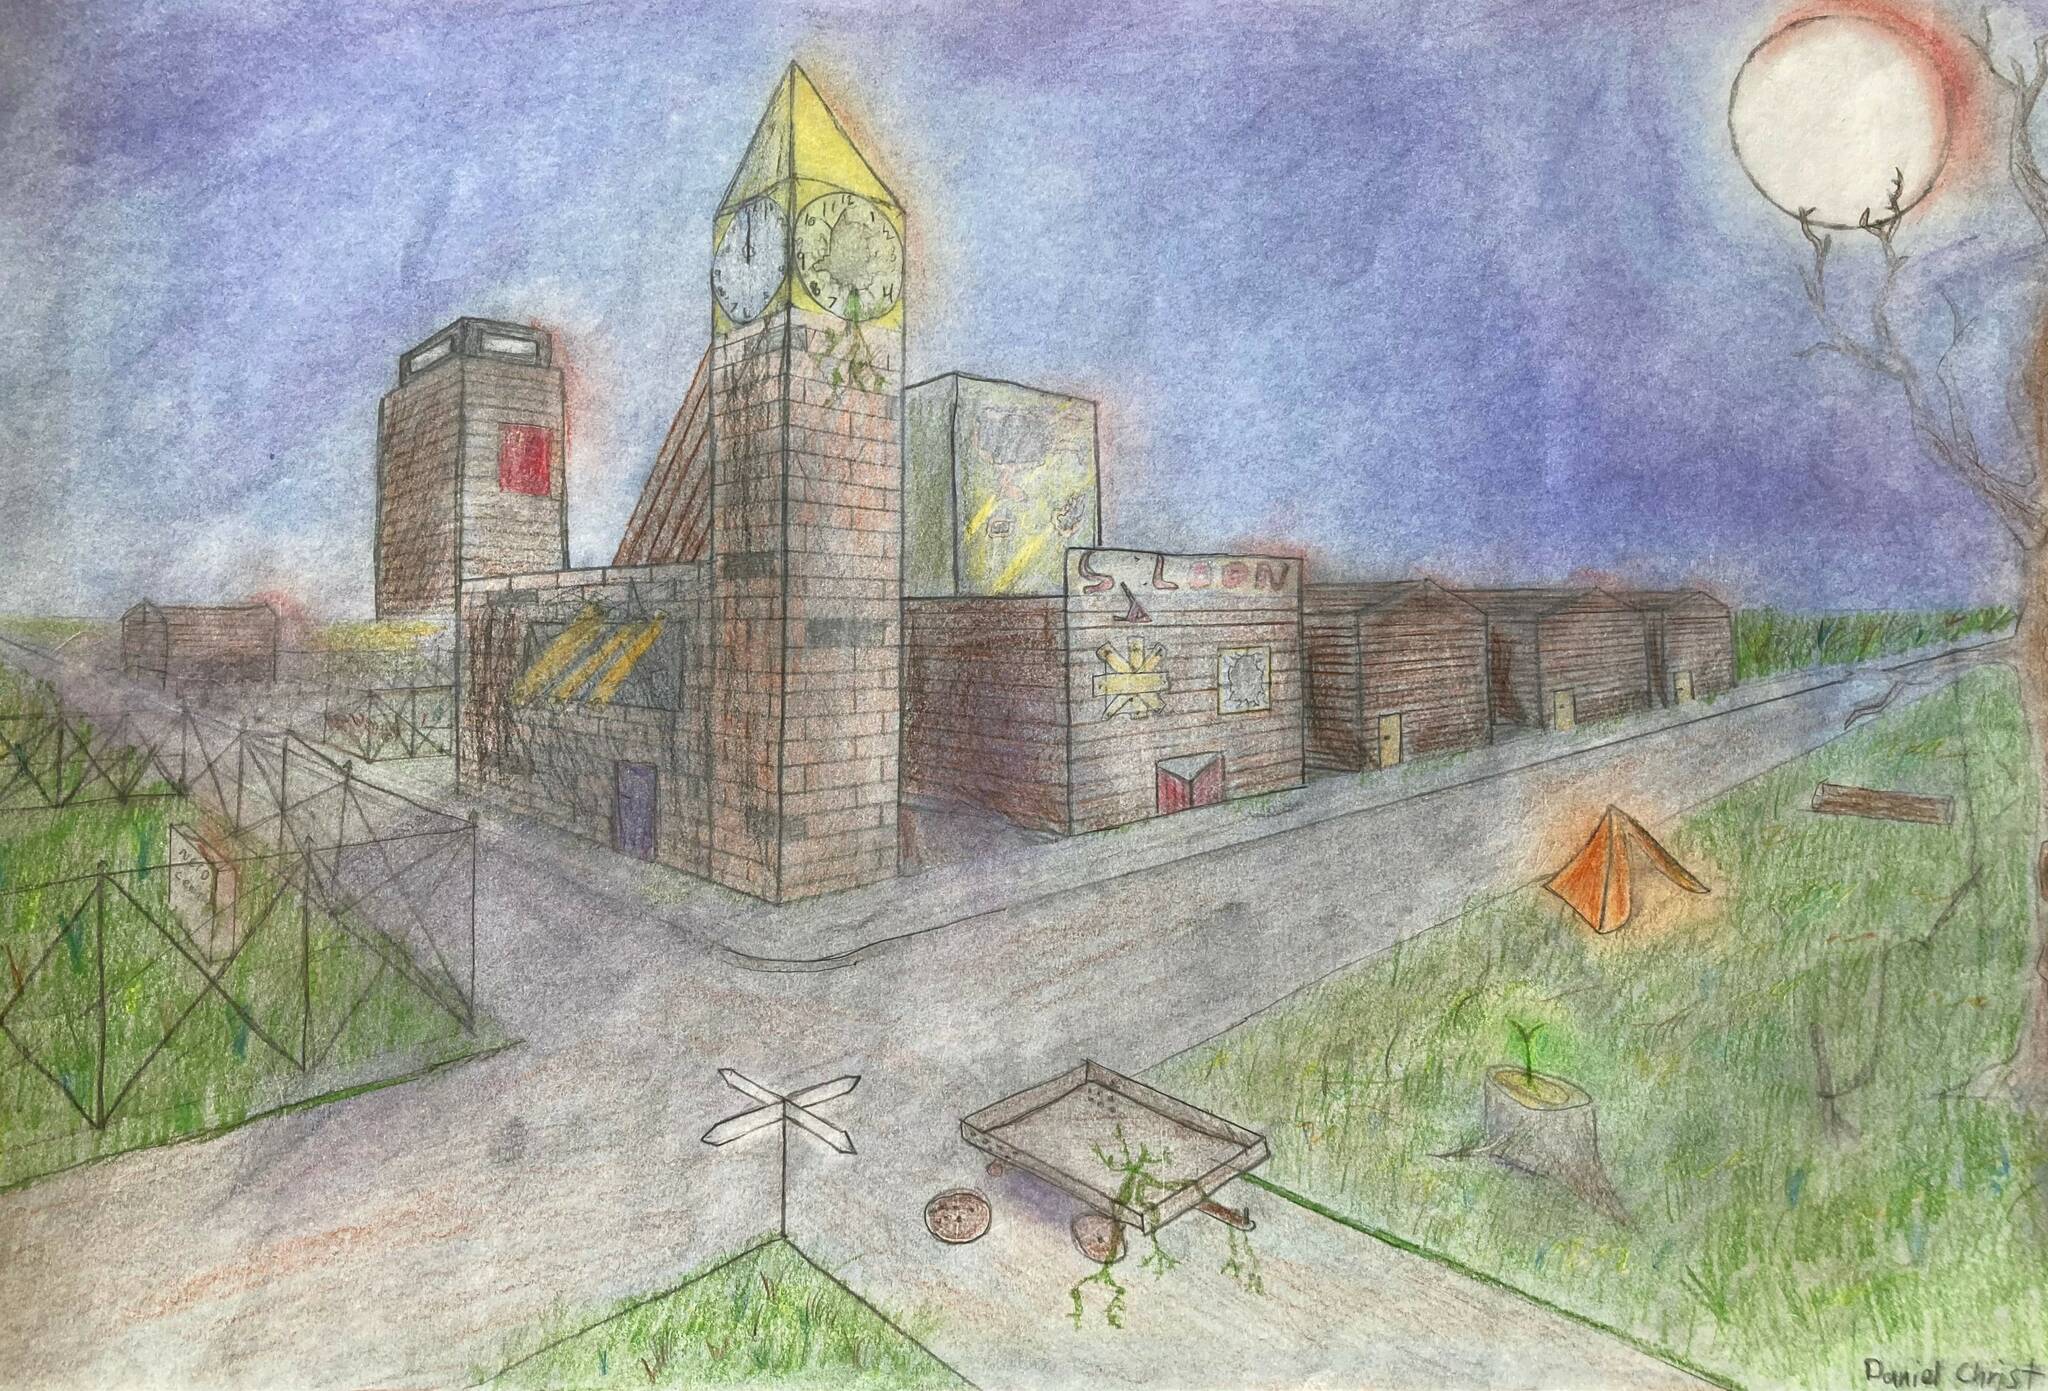 Color drawing by youth artist Daniel Christ, on display at Homer Council on the Arts. Photo provided by Homer Council on the Arts.